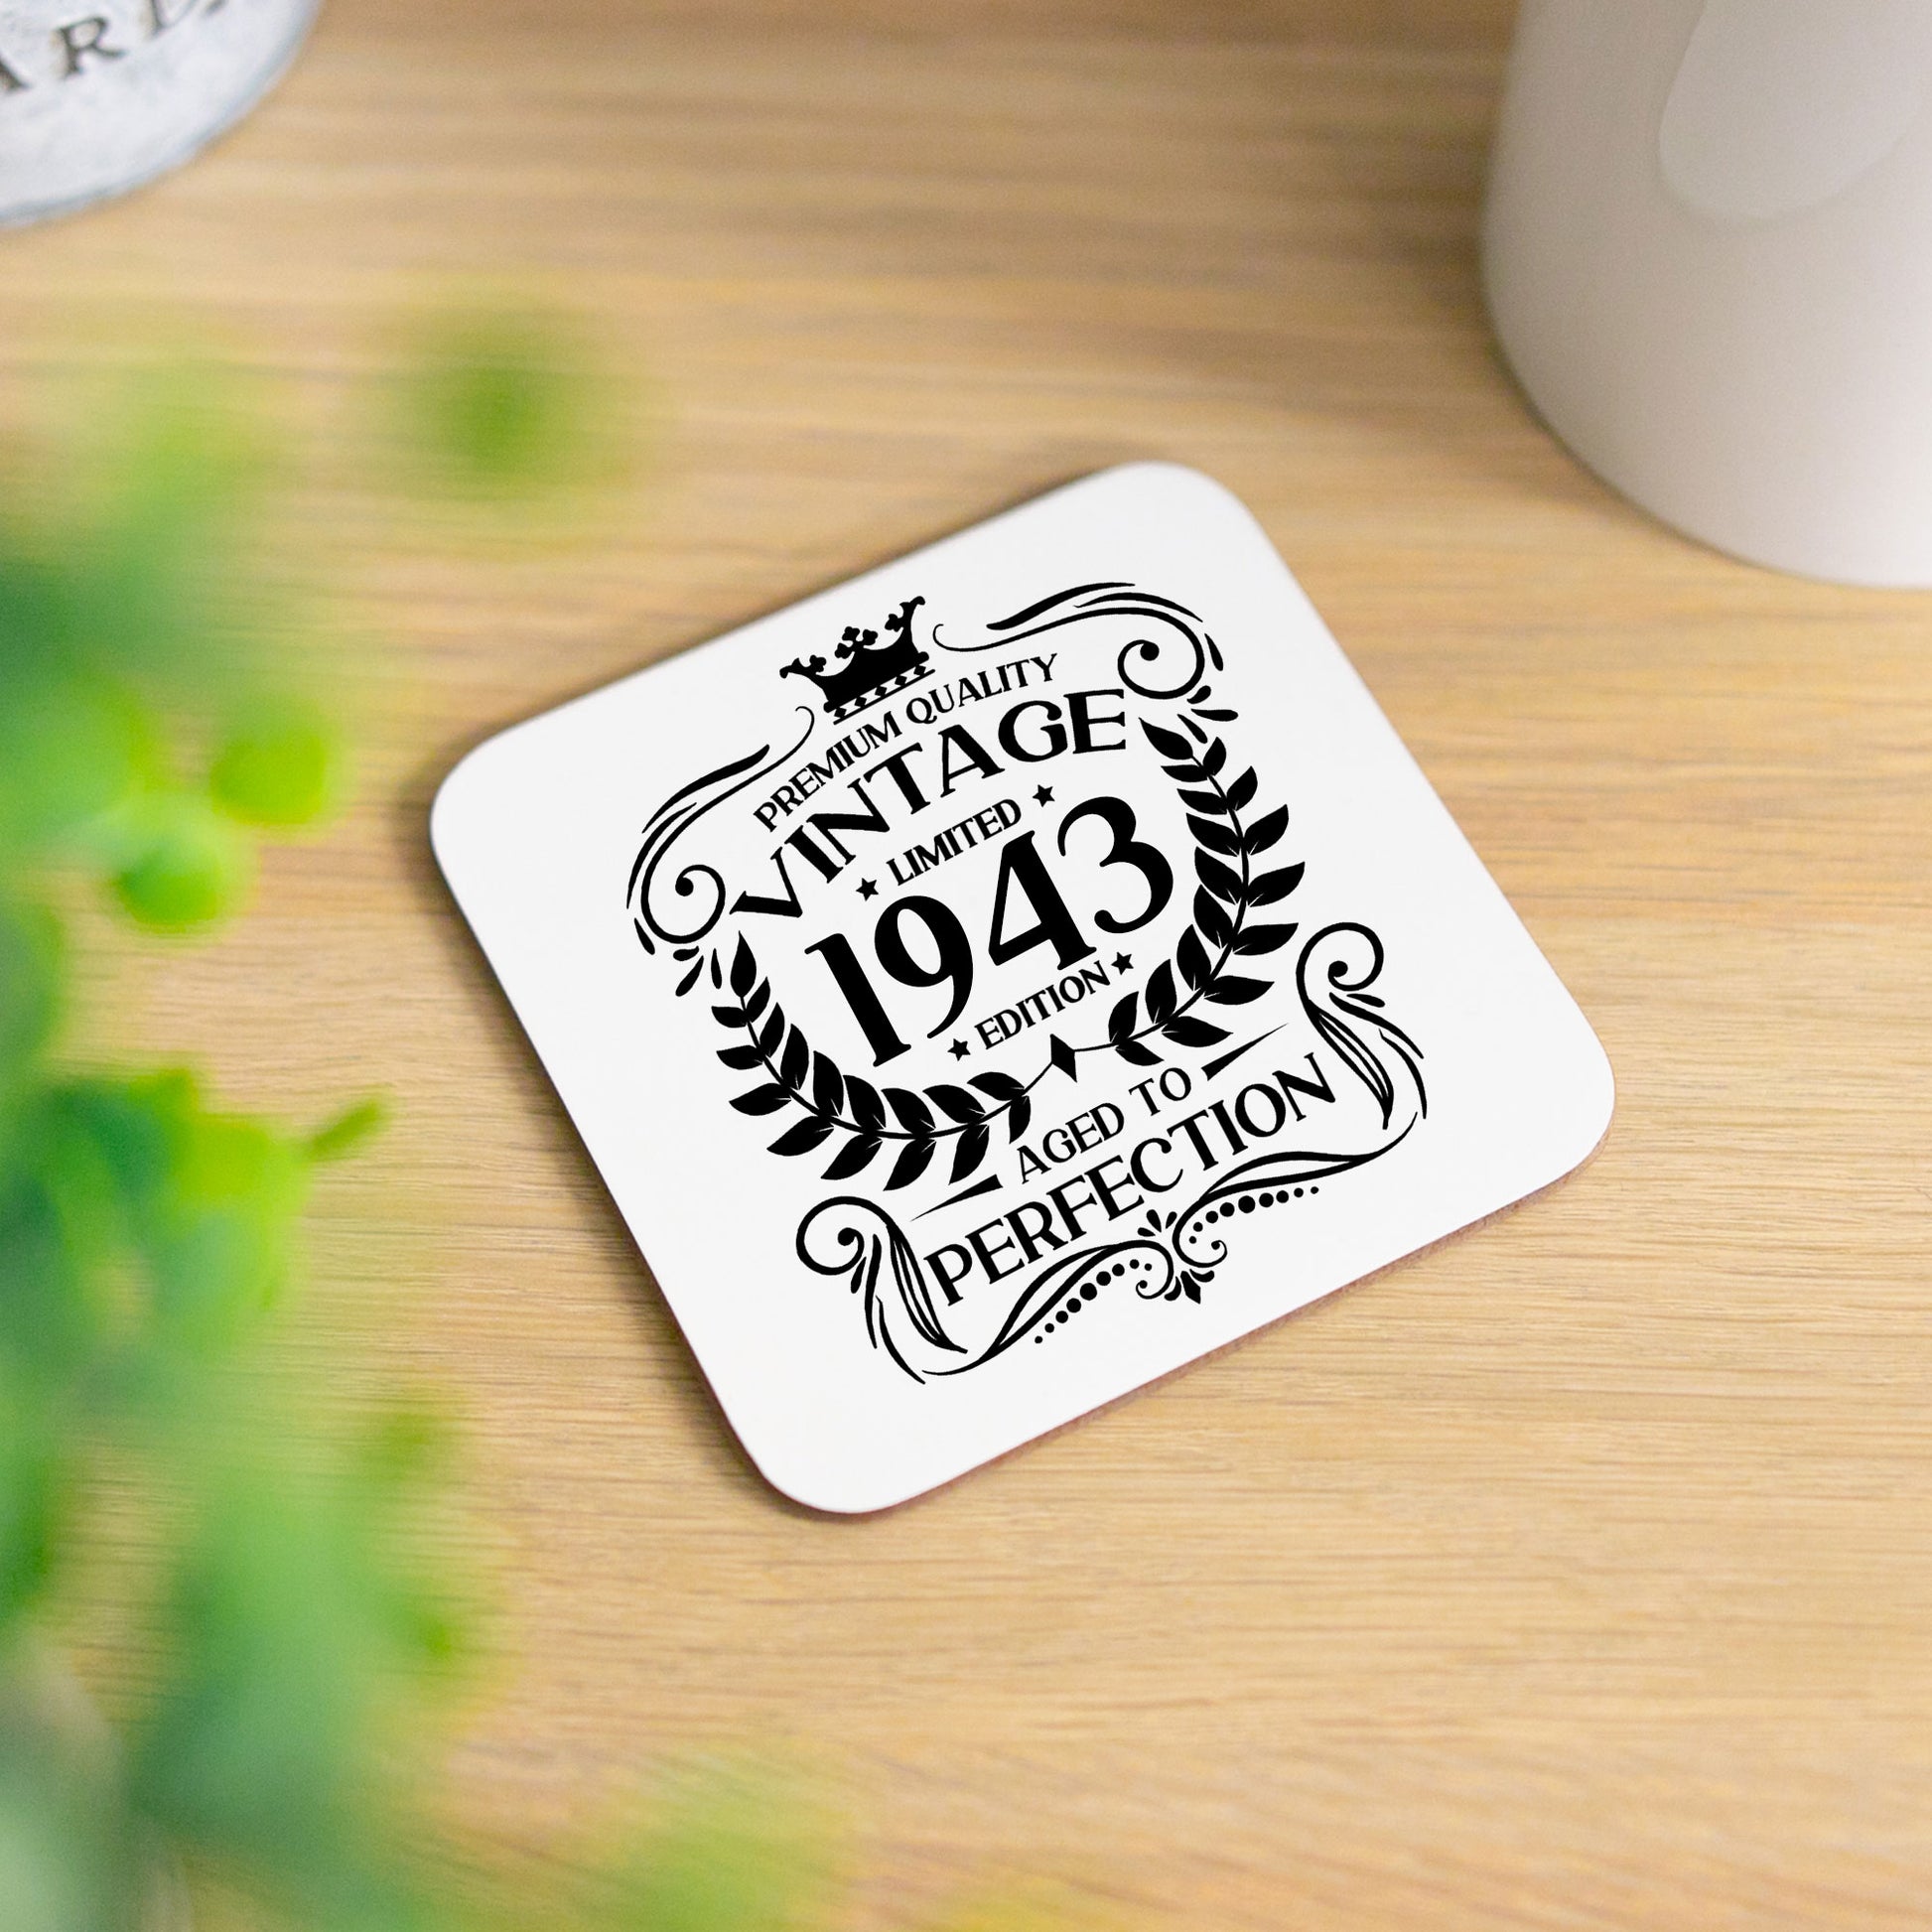 Vintage 1943 80th Birthday Engraved Gin Glass Gift  - Always Looking Good - Glass & Printed Coaster  